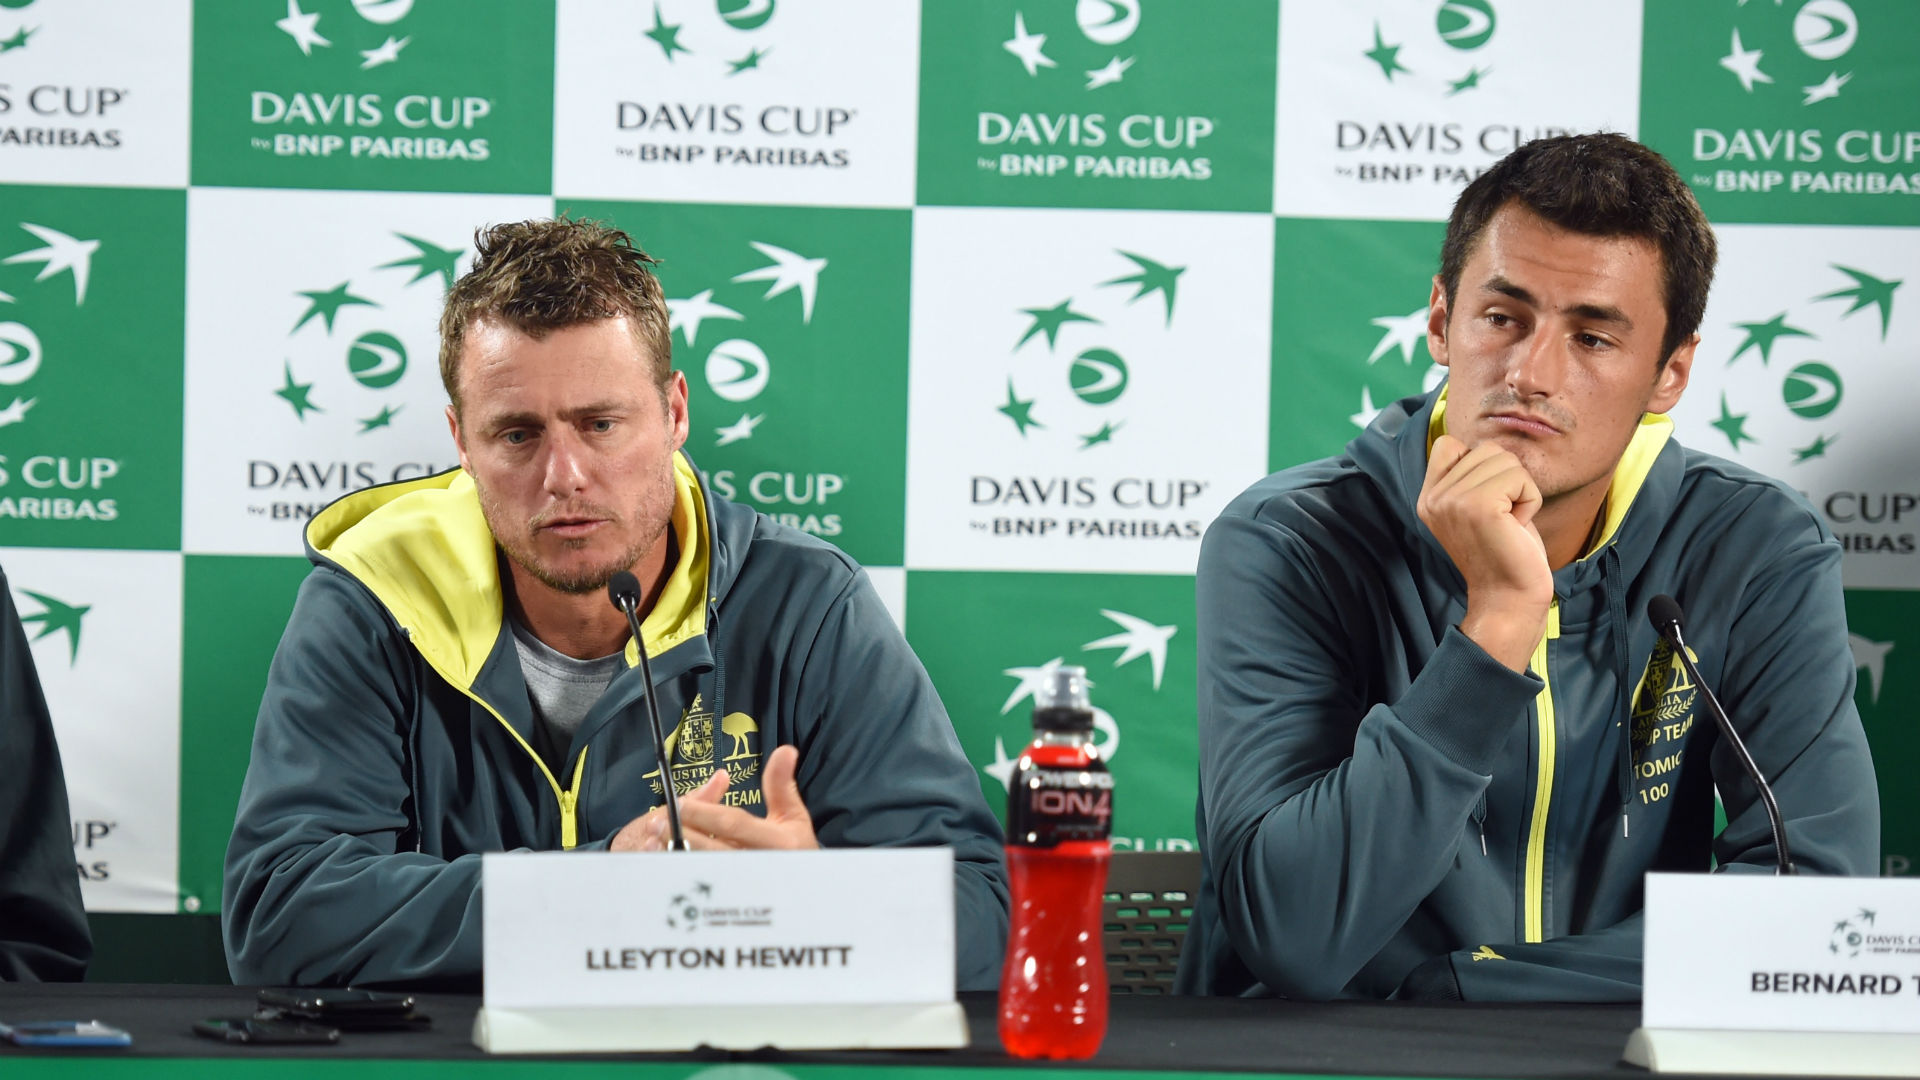 Lleyton Hewitt accused Bernard Tomic of threatening him and his family, but the 26-year-old says the former world number one is lying.